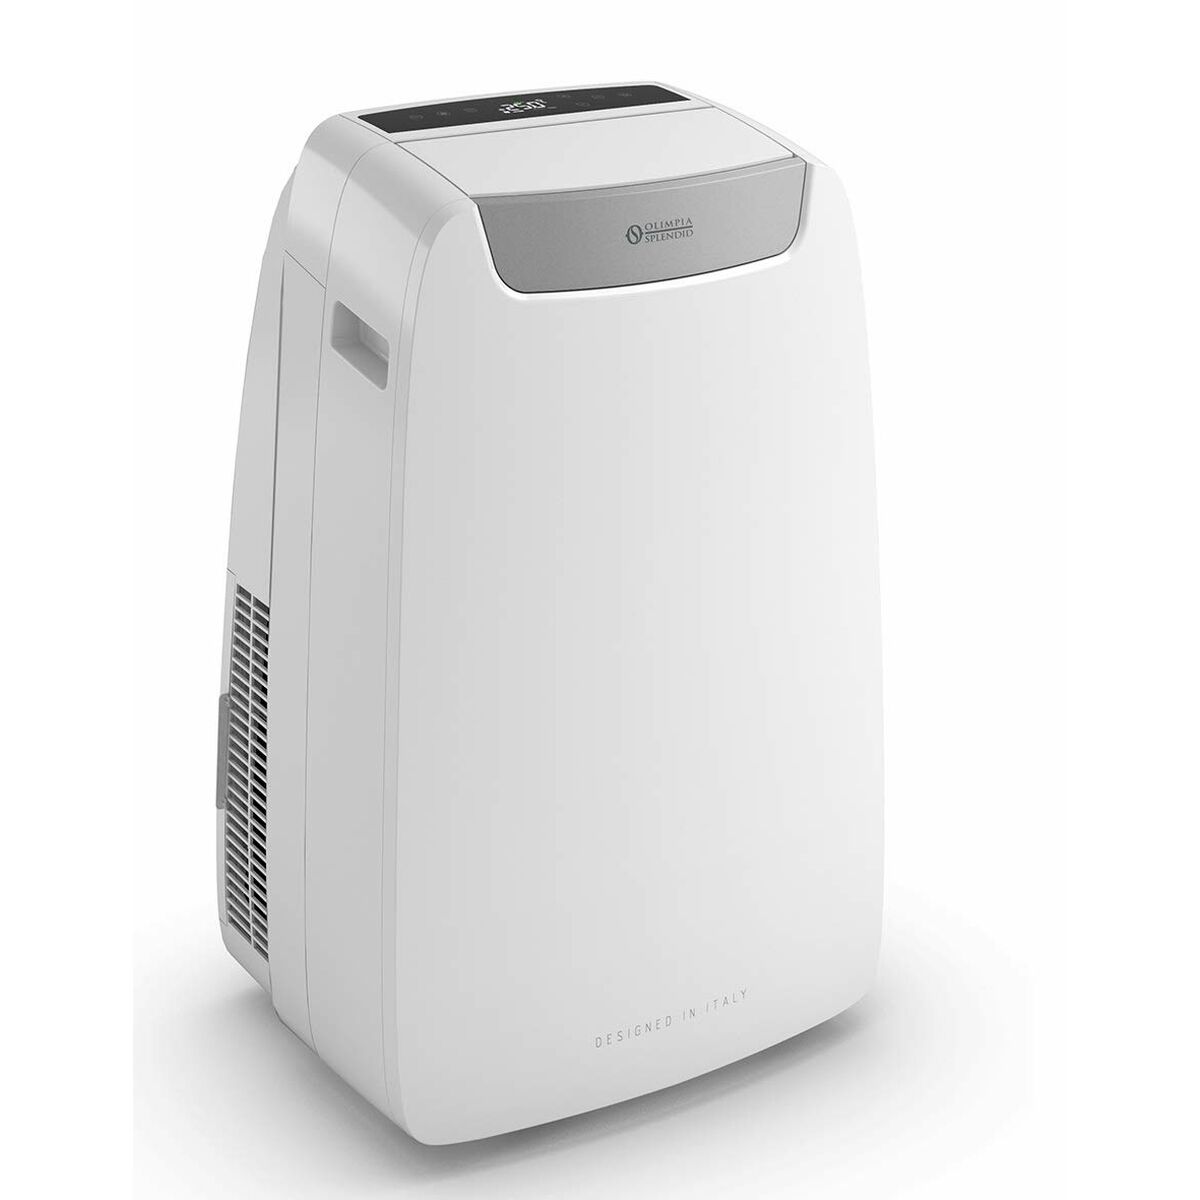 Portable Air Conditioner Olimpia Splendid Air Pro 14 White A+, Olimpia Splendid, Home and cooking, Portable air conditioning, portable-air-conditioner-olimpia-splendid-air-pro-14-white-a, Brand_Olimpia Splendid, category-reference-2399, category-reference-2450, category-reference-2451, category-reference-t-19656, category-reference-t-21087, category-reference-t-25214, Condition_NEW, ferretería, Price_600 - 700, summer, RiotNook